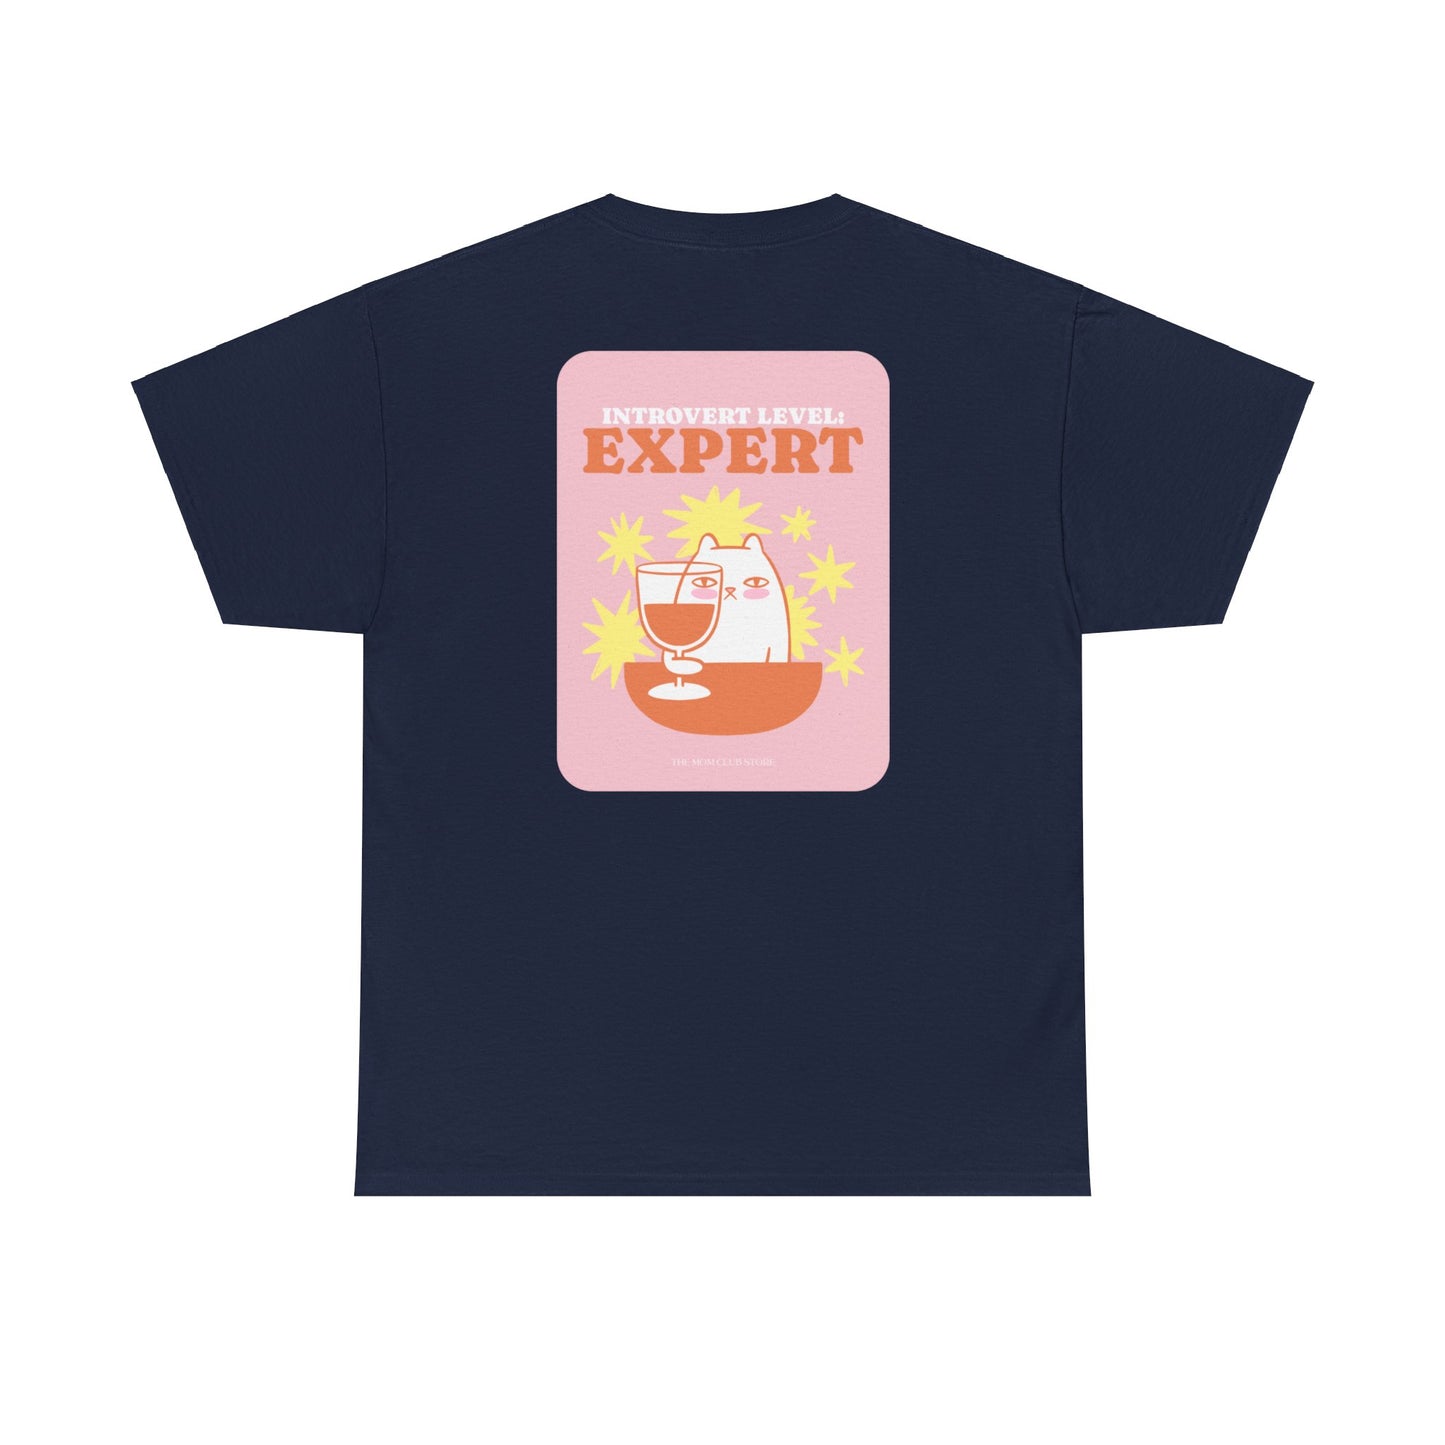 INTROVERT LEVEL EXPERT Unisex Printed Short-Sleeve T-Shirt for Adults